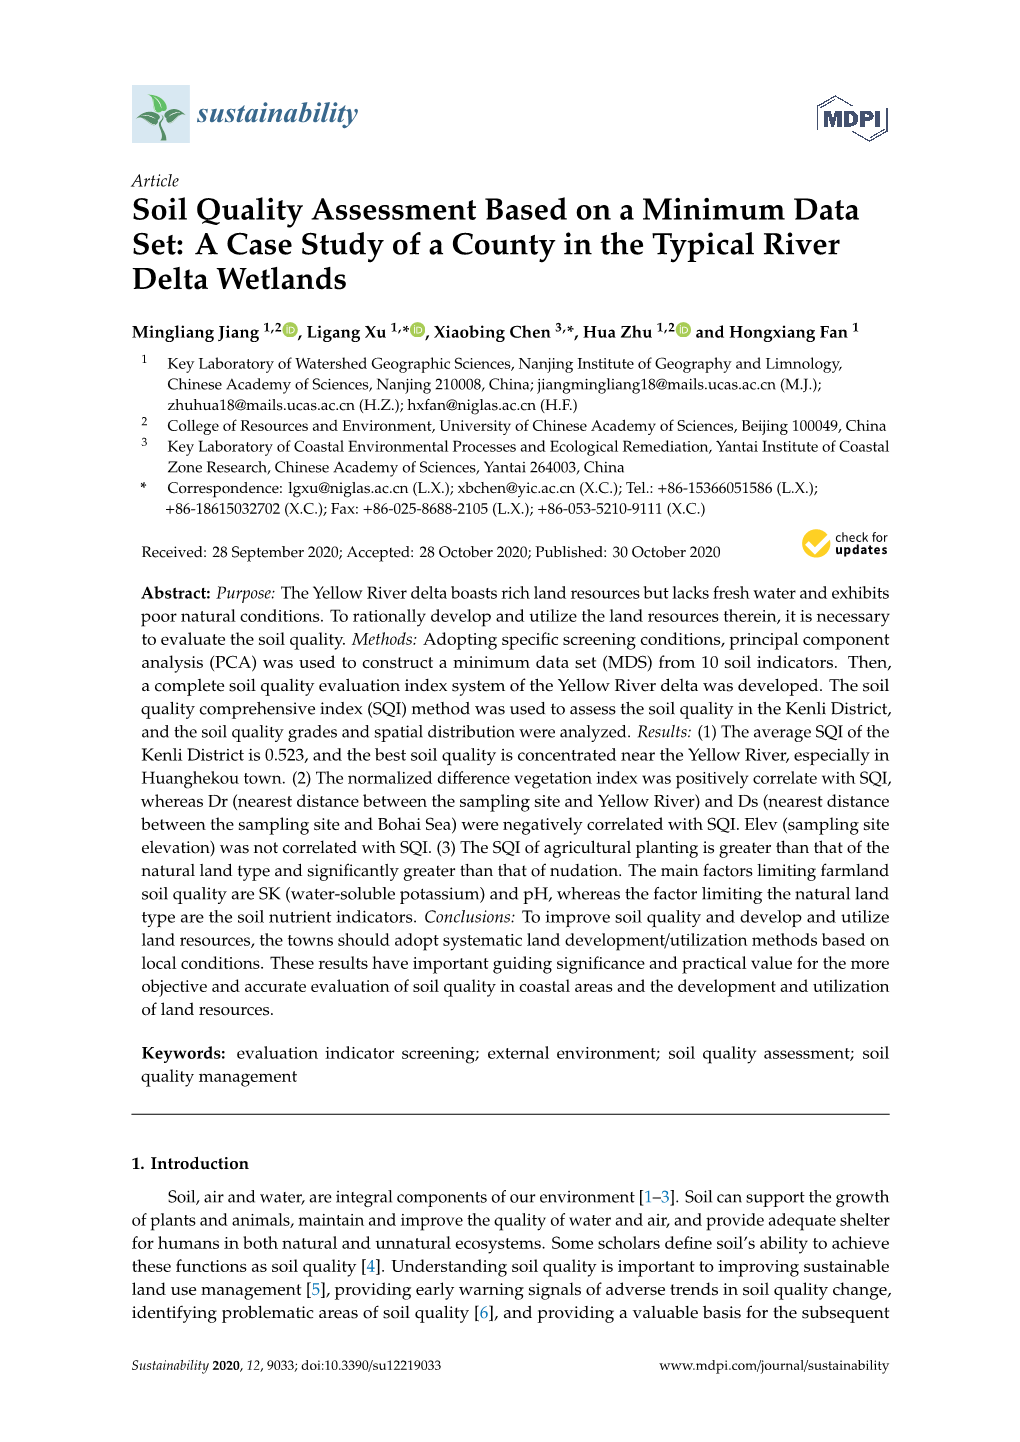 Soil Quality Assessment Based on a Minimum Data Set: a Case Study of a County in the Typical River Delta Wetlands